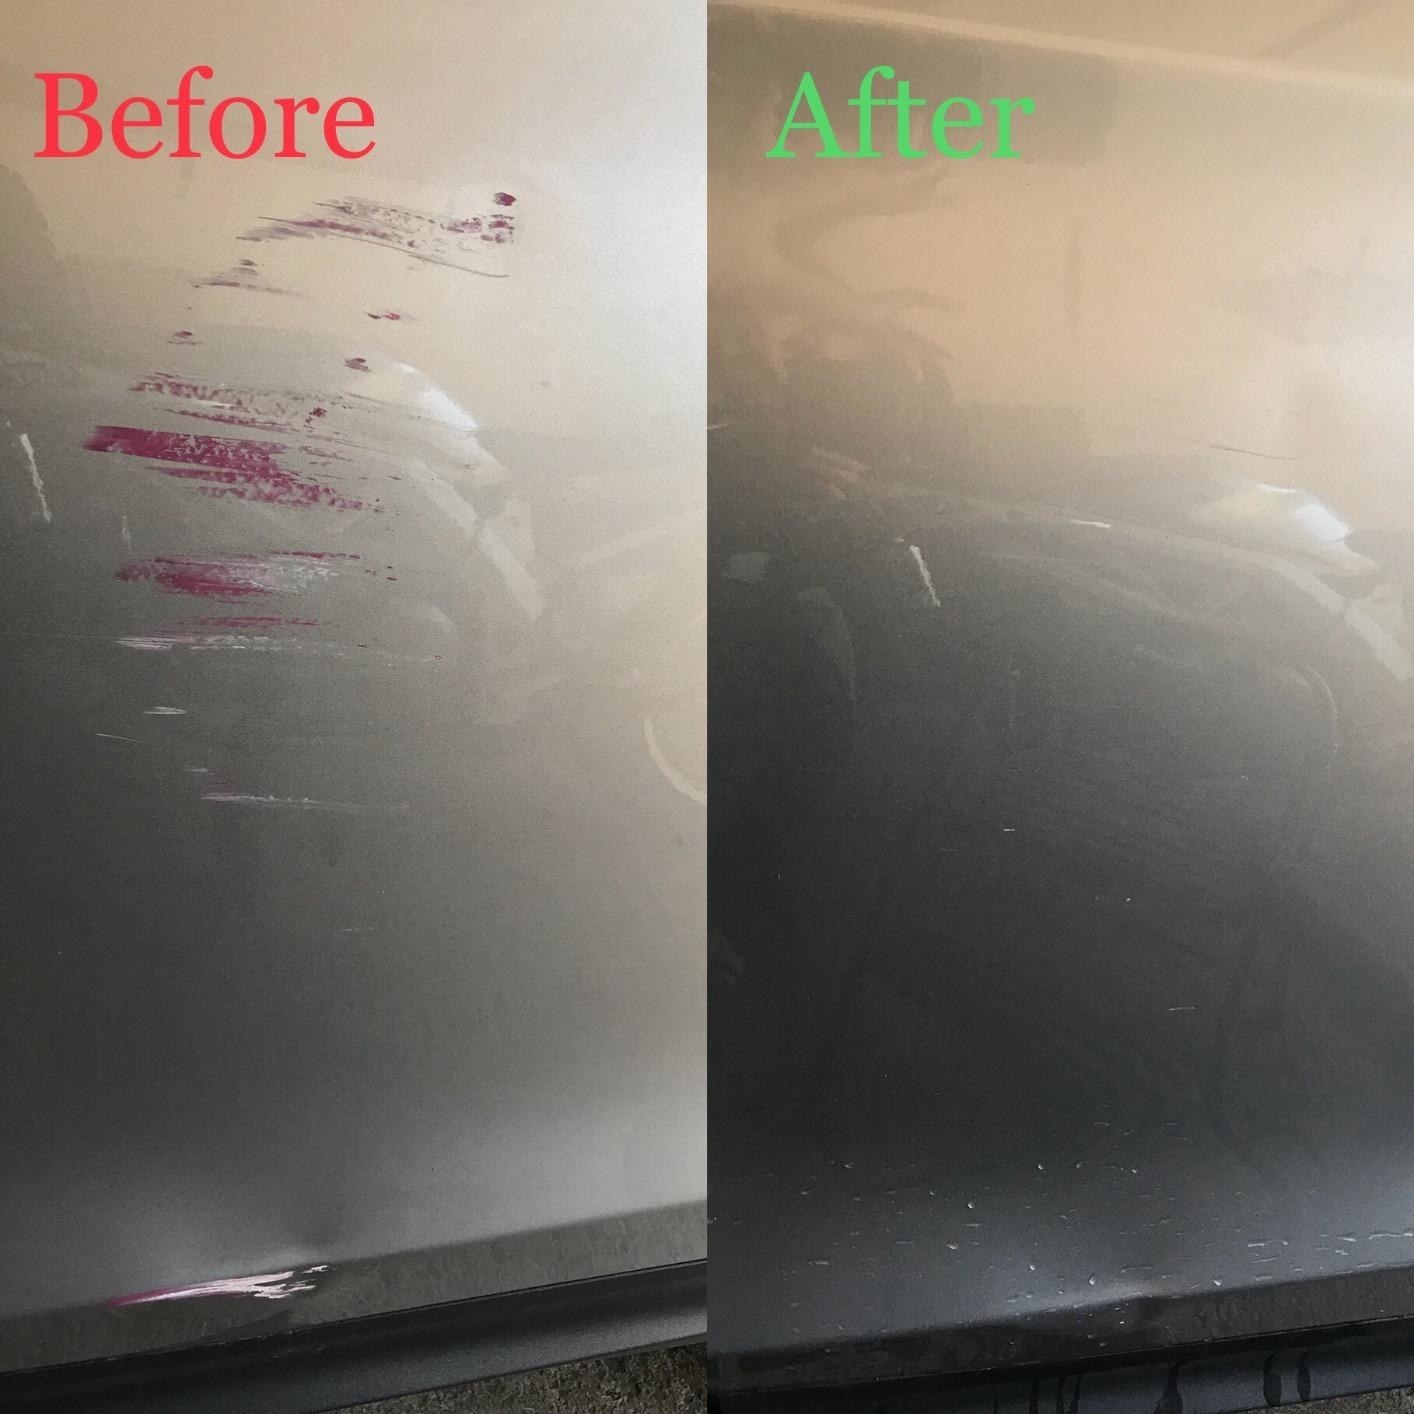 A scratched-up car door before (with remnants of another car's paint) and the same door after with only a few minor scratches left